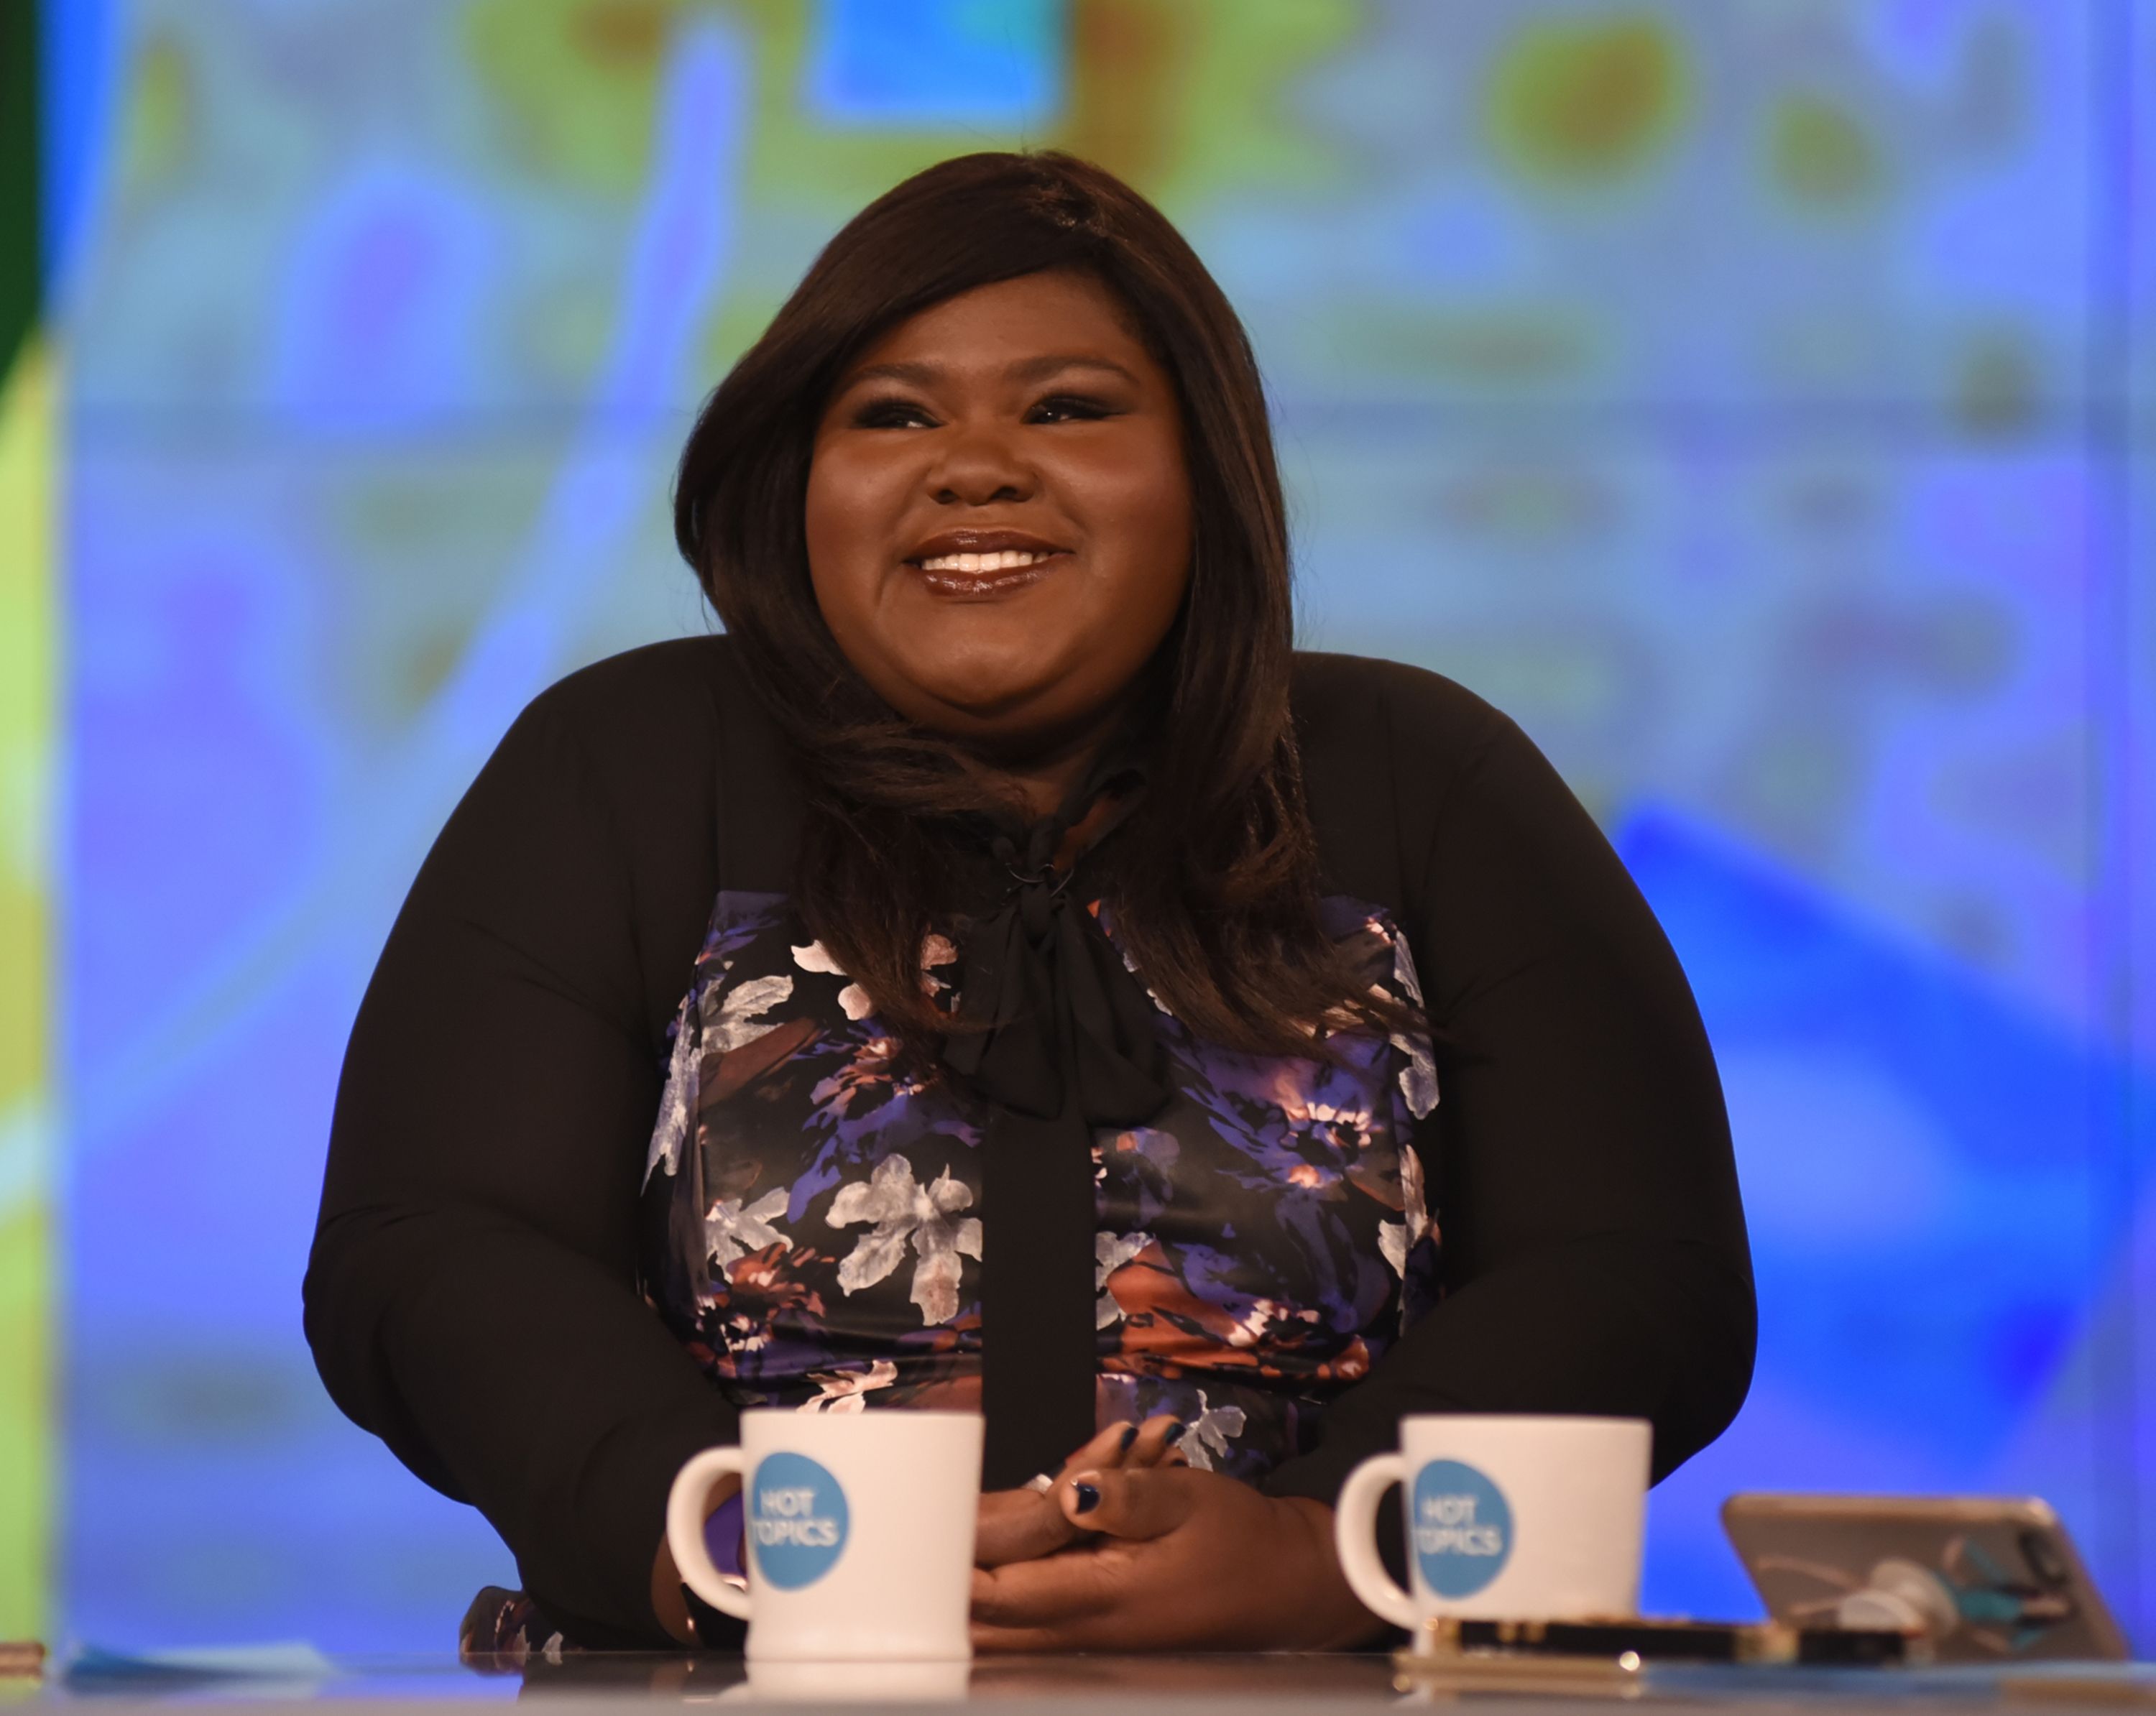 Gabourey Sidibe appears as a guest on "The View" on Tuesday, October 24, 2017 | Source: Getty Images